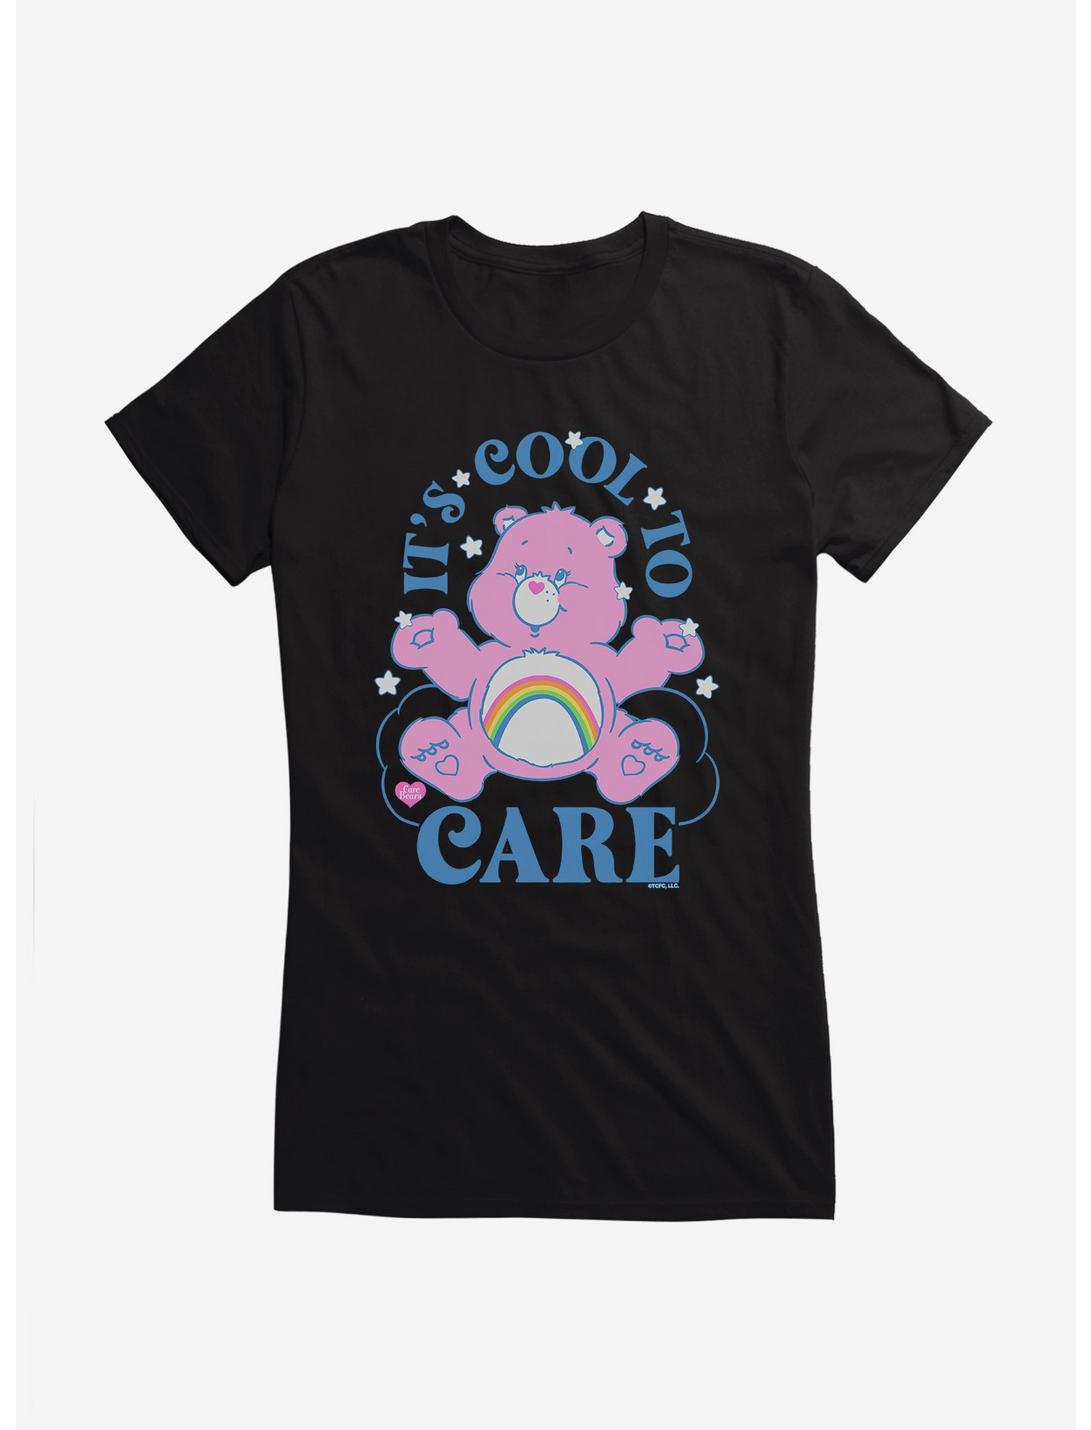 Care Bears Cheer Bear Care About That Money Girls T-Shirt, BLACK, hi-res